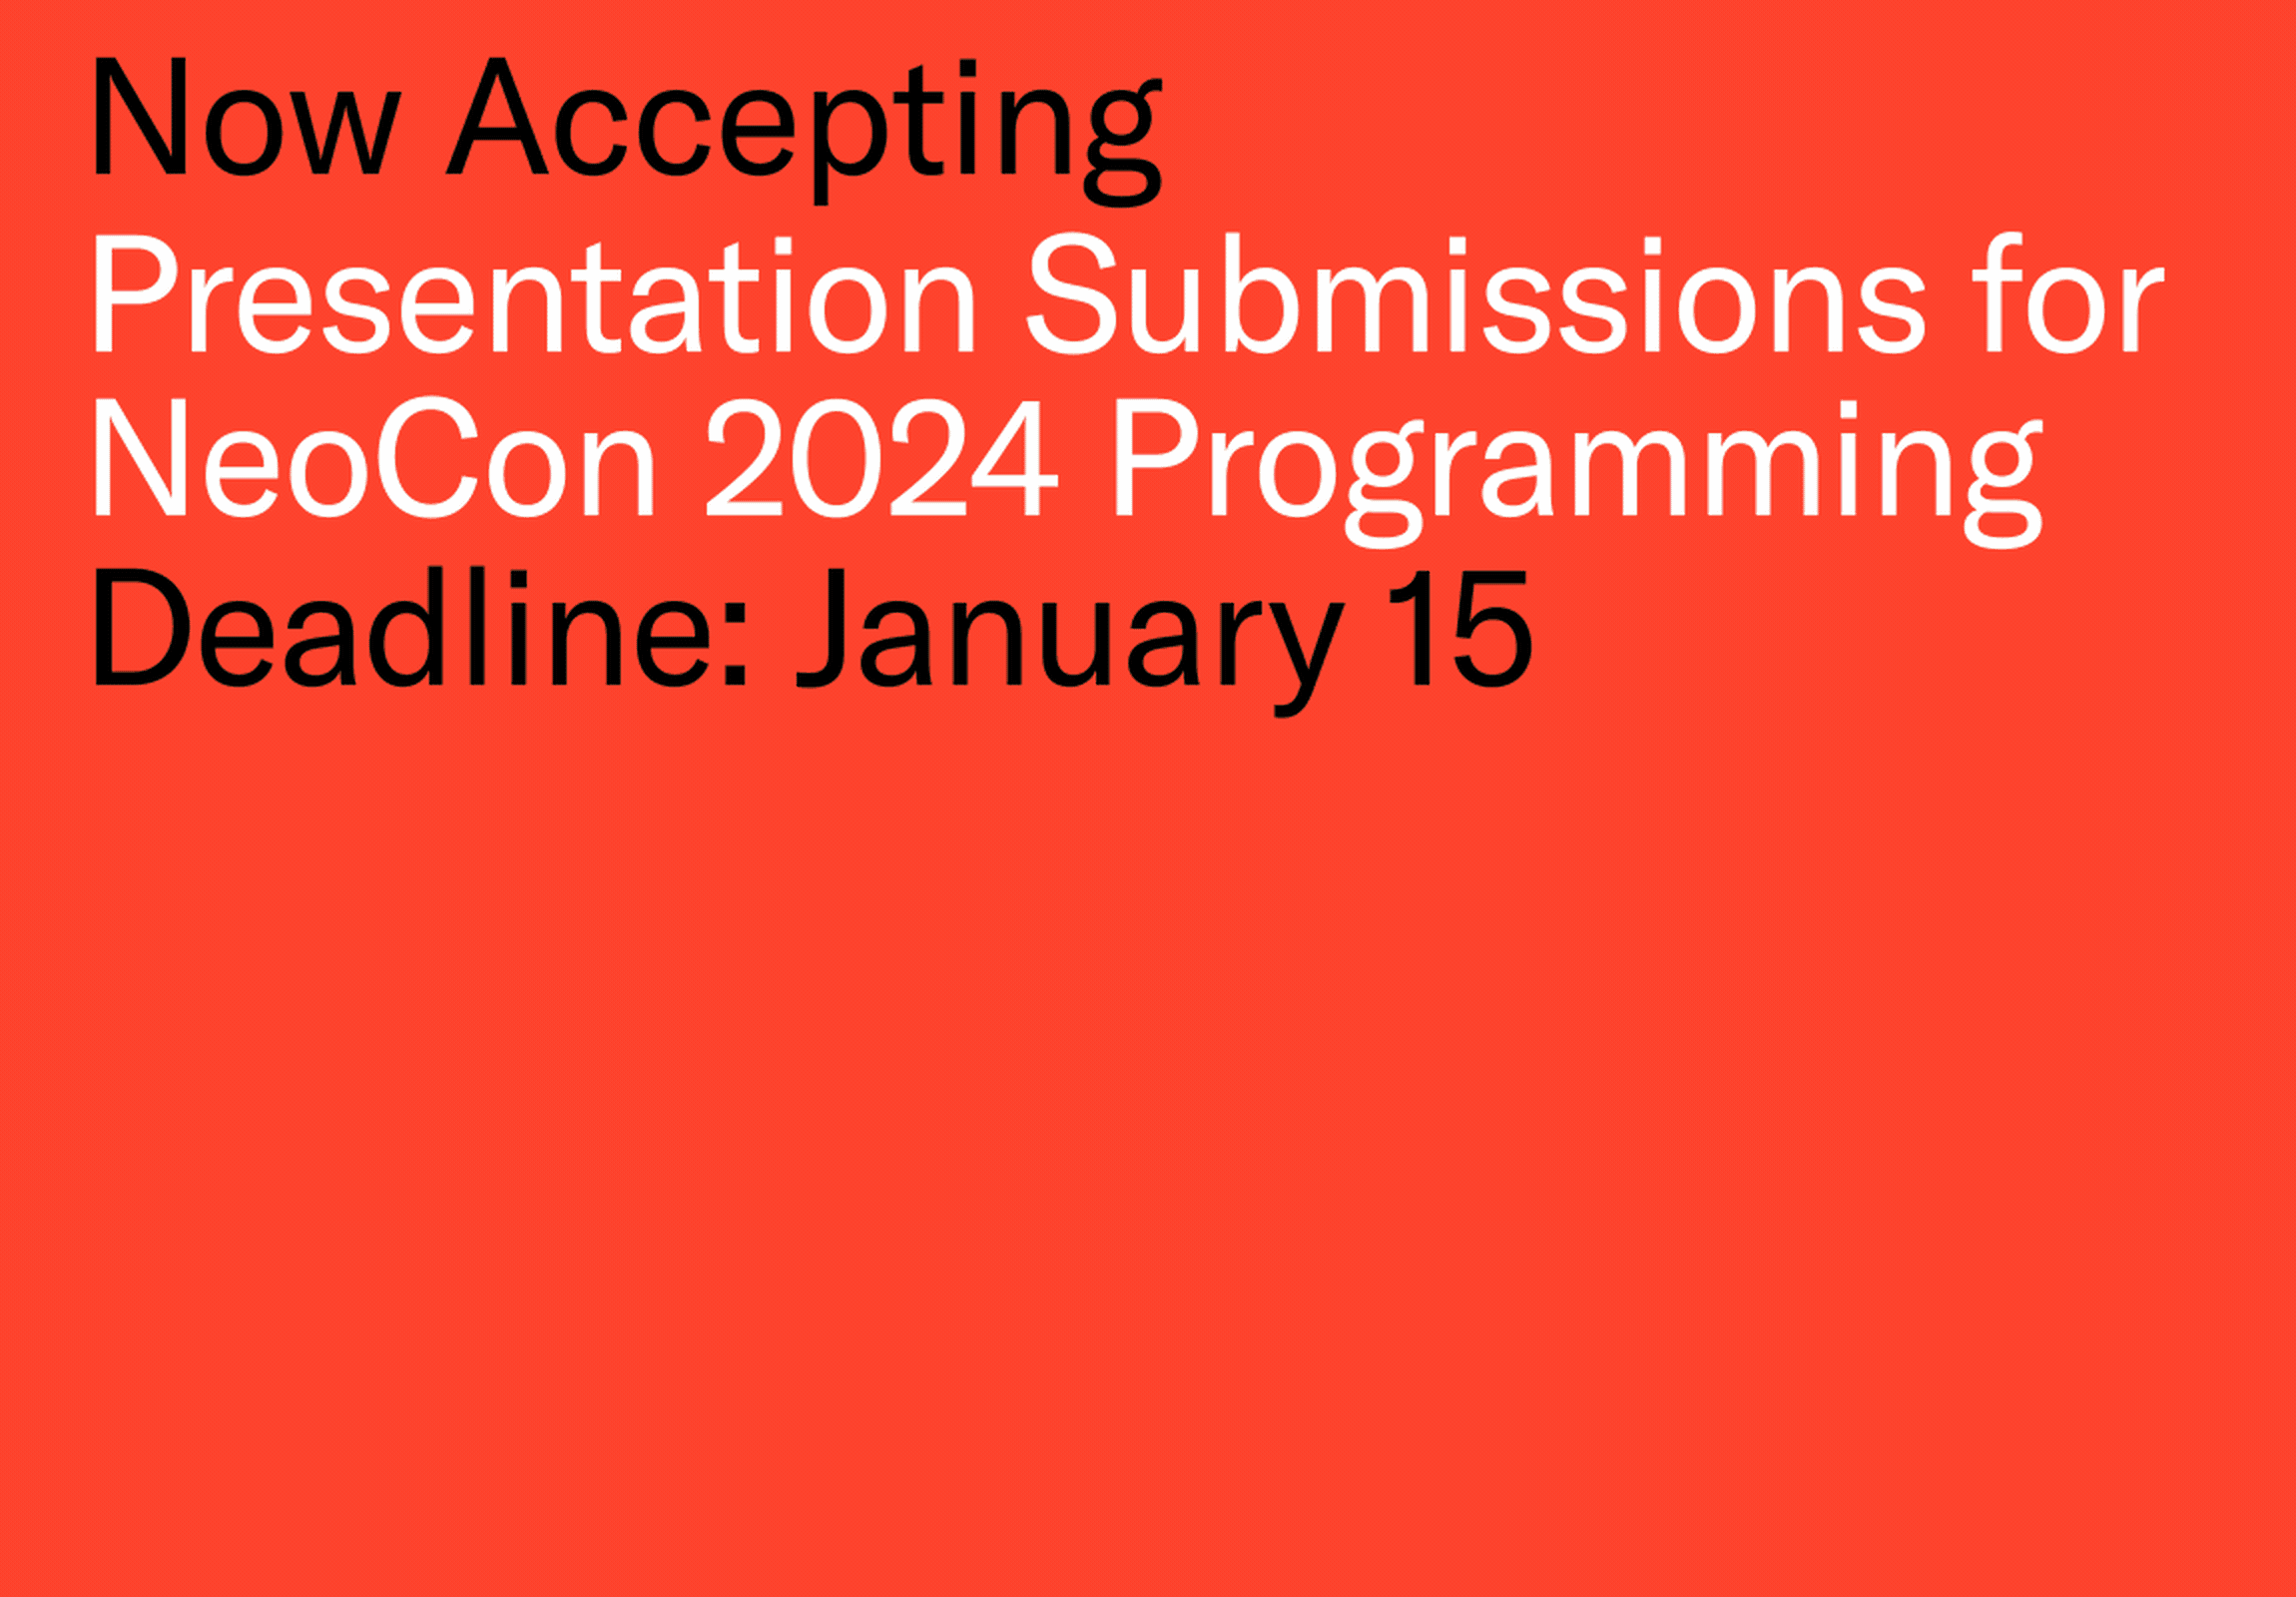 Now Accepting Presentation Submissions for NeoCon 2024 Programming Deadline: January 15